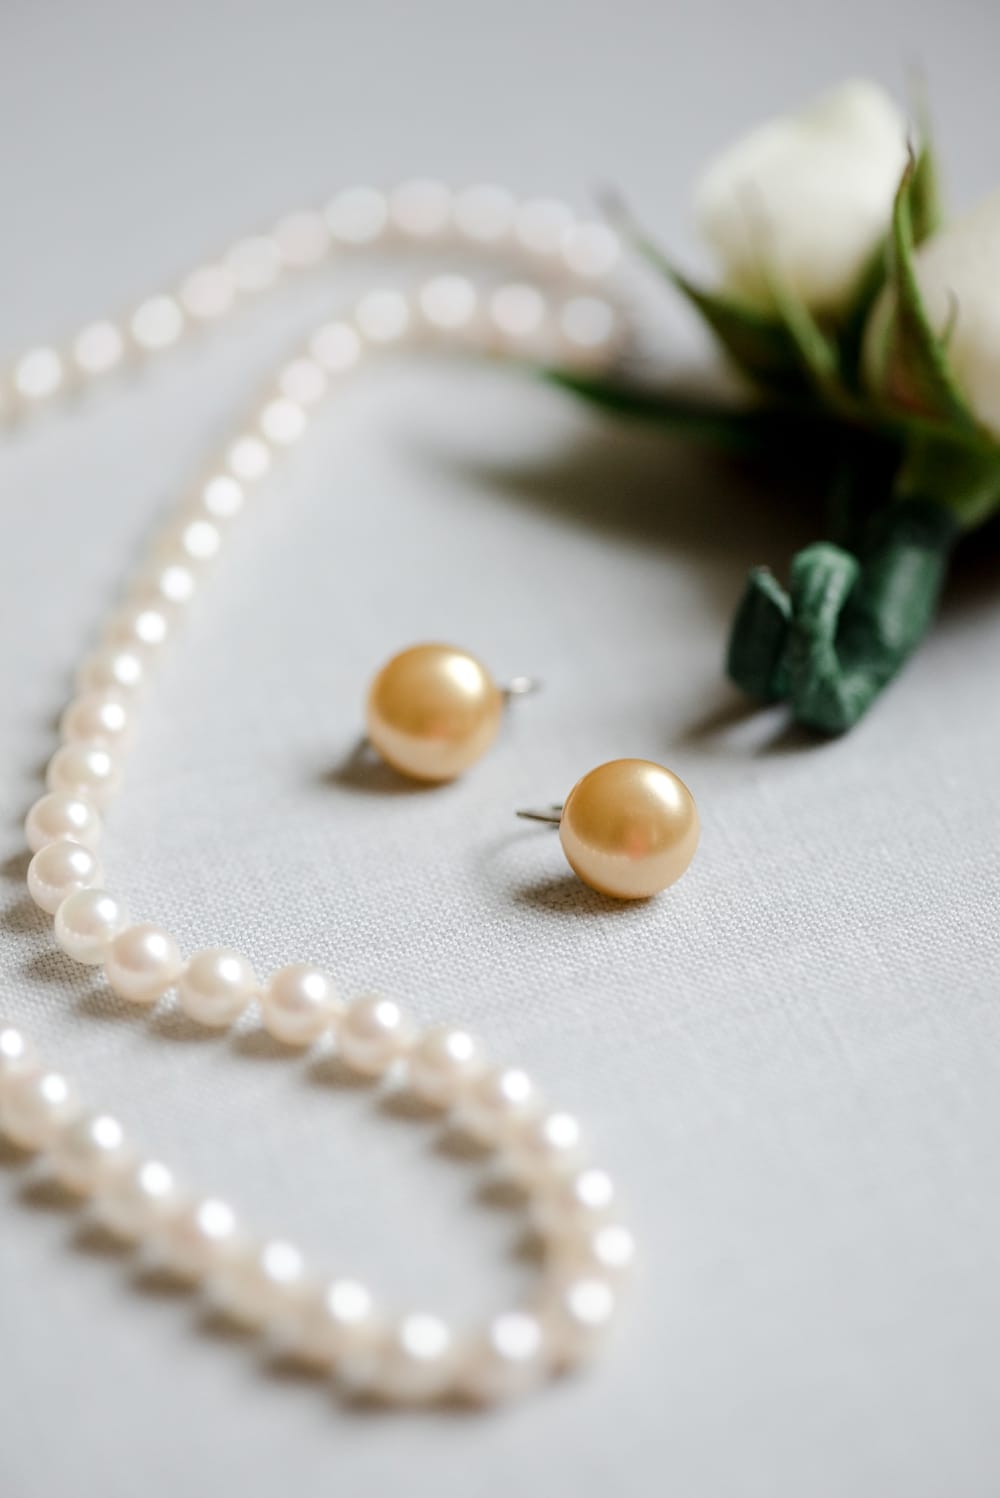 Pearl necklace and earrings bridal details at Rust Manor House in Leesburg